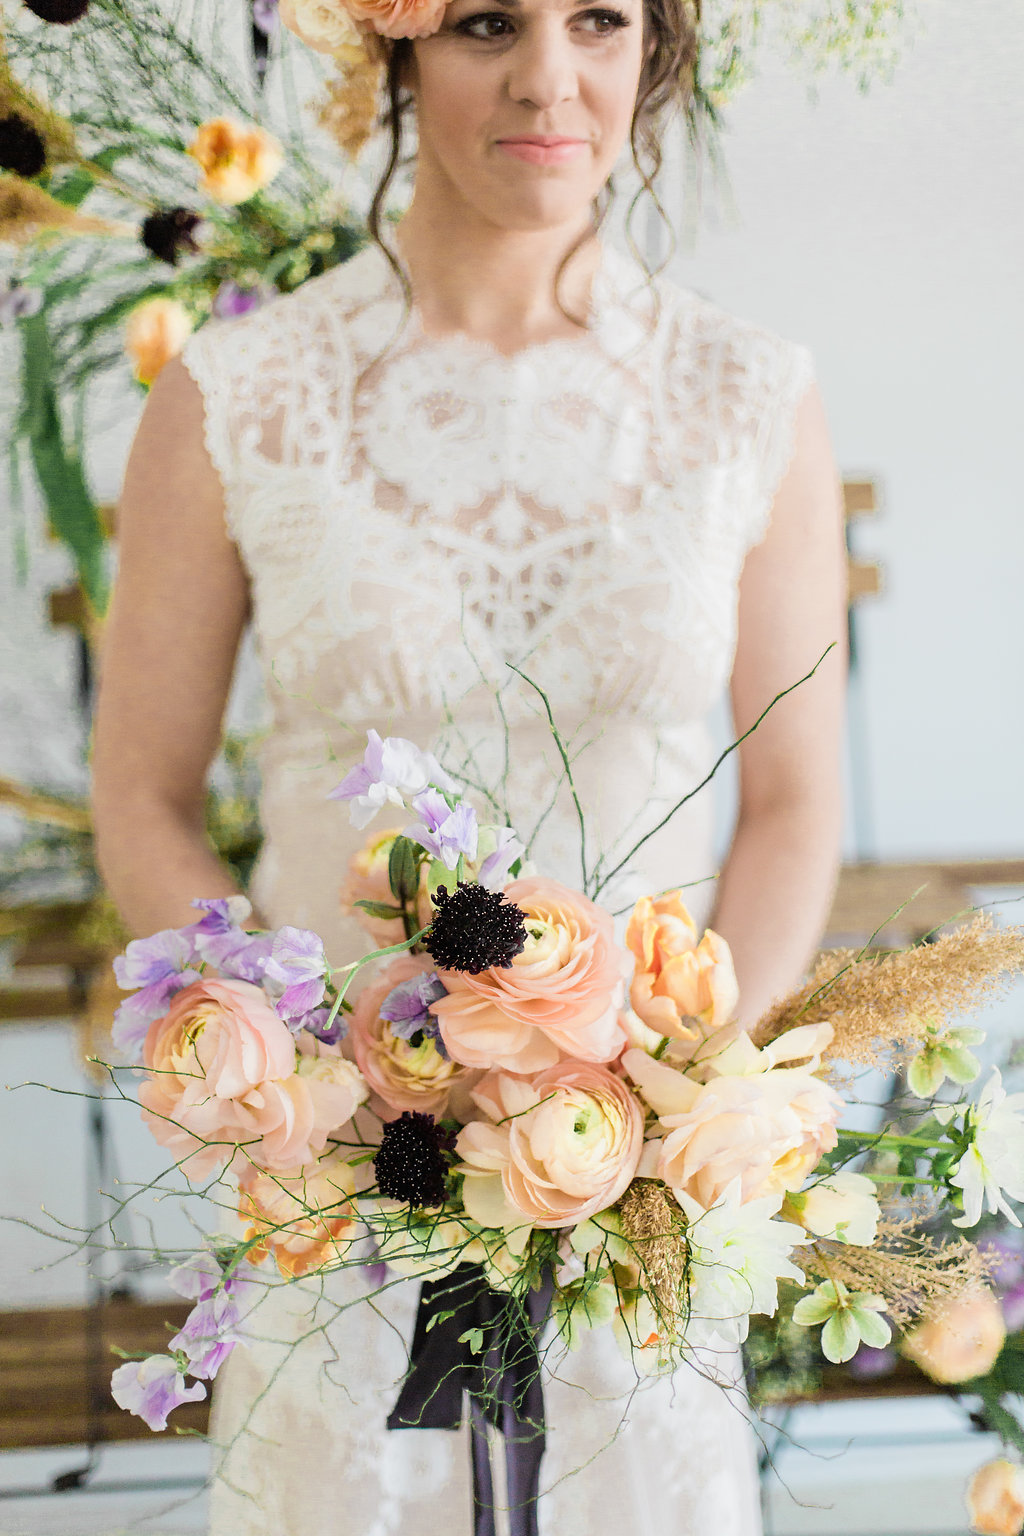 How to Carry a Bridal Bouquet | The Day's Design 